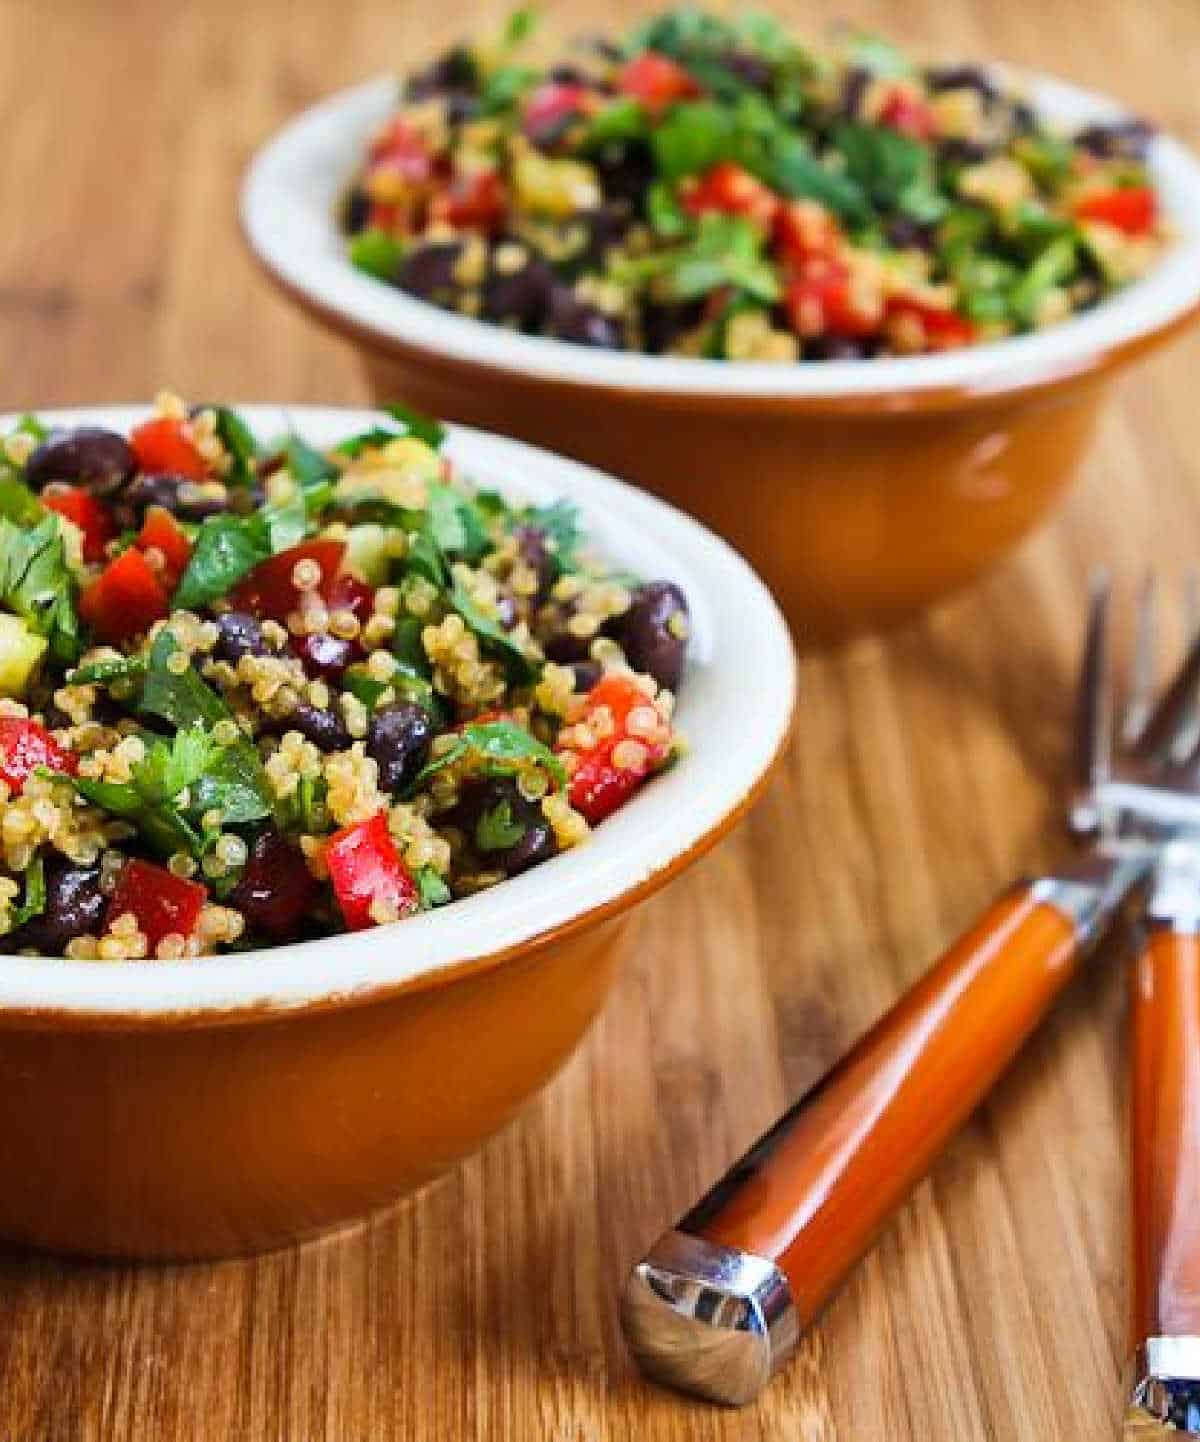 Southwestern Quinoa Salad cropped image of two bowls of salad